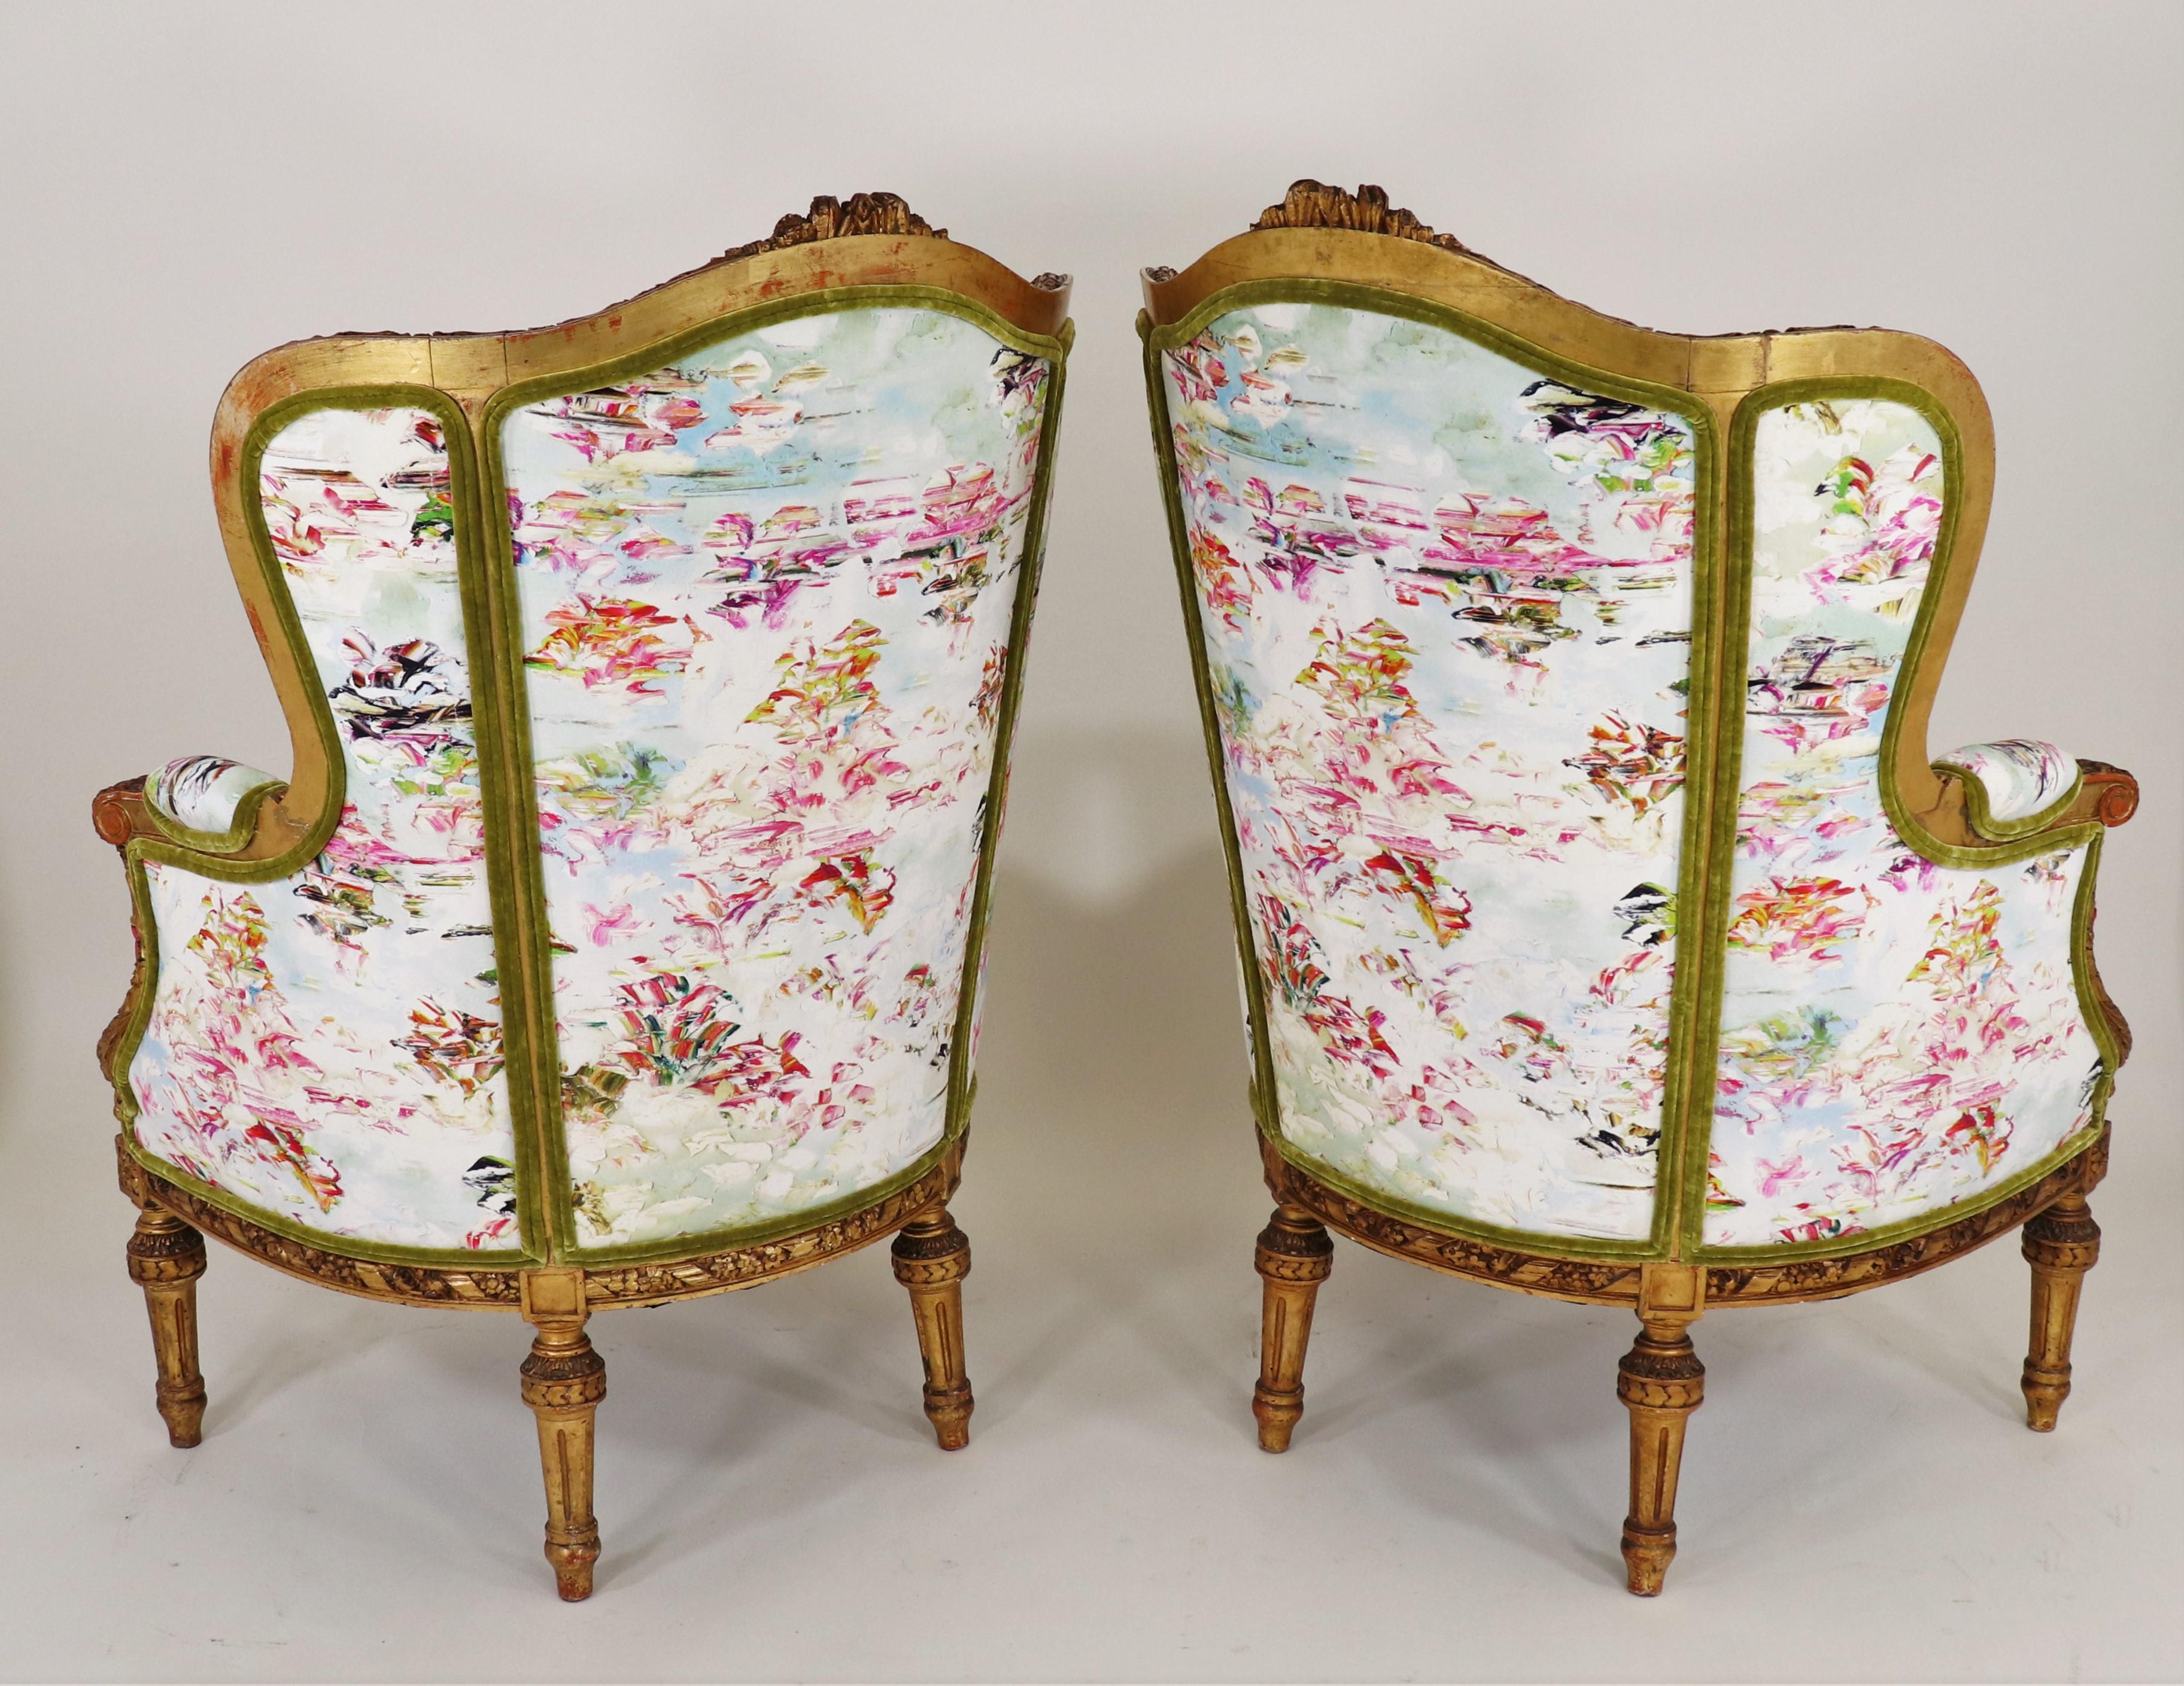 Pair of Mid-19th Century Louis XVI Giltwood Bergère Armchairs with Modern Fabric For Sale 1